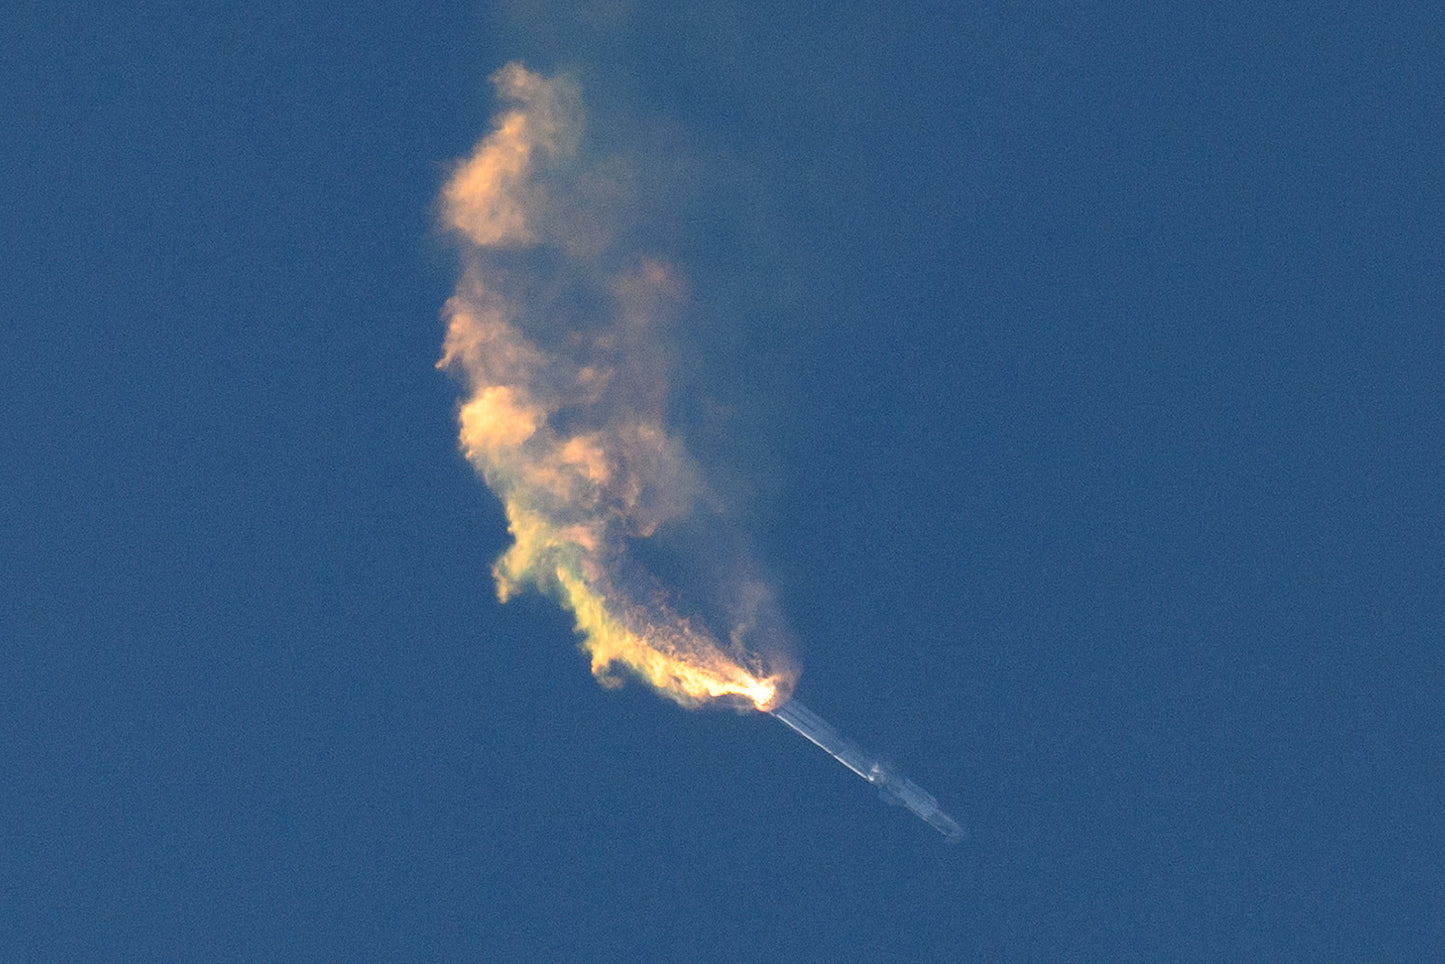 SPACE X STARSHIP ROCKET EXPLOSION GLOSSY POSTER PICTURE PHOTO PRINT BANNER